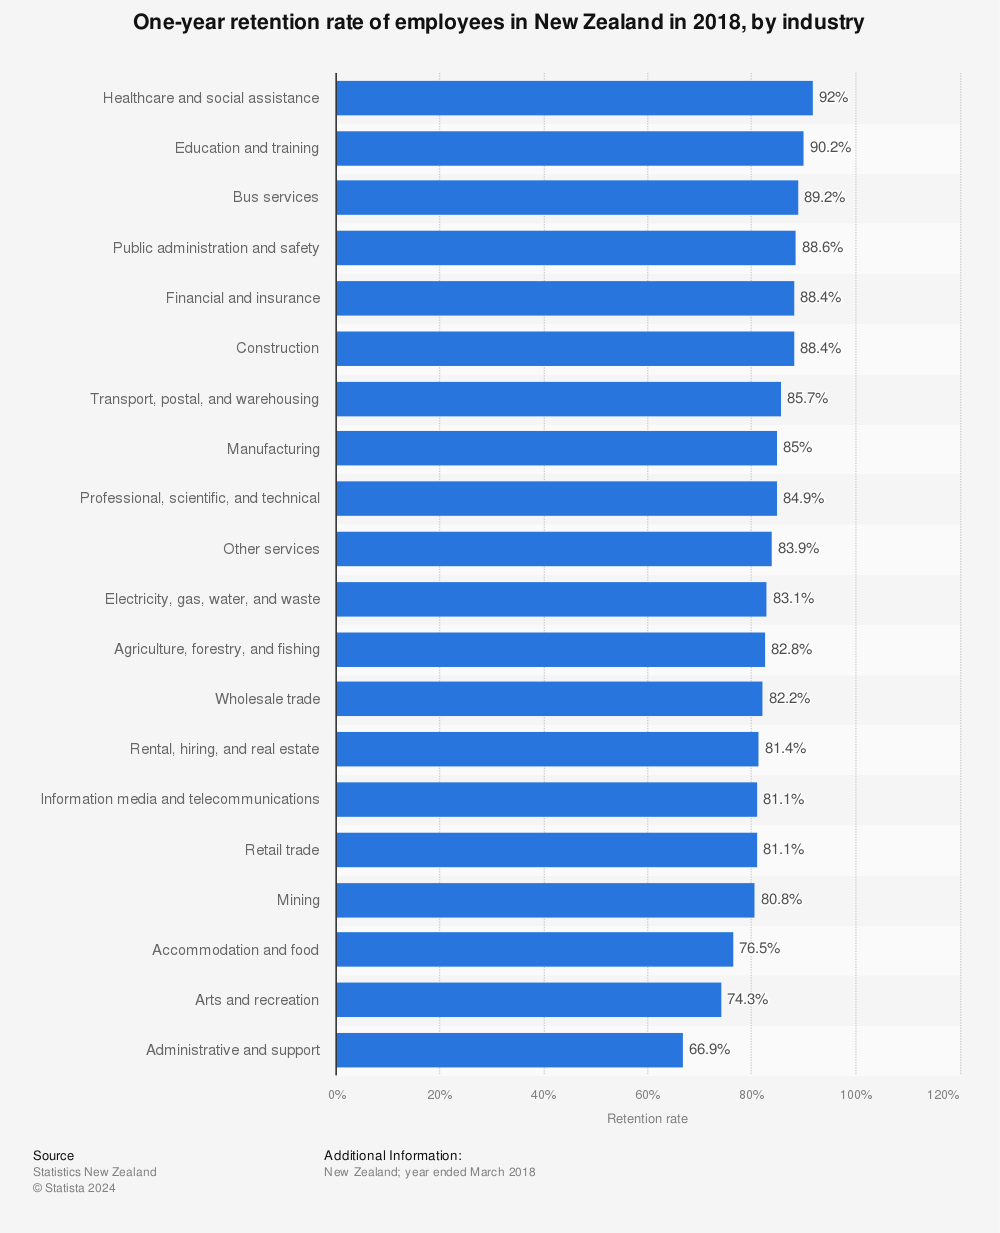 Statistic: One-year retention rate of employees in New Zealand in 2018, by industry  | Statista